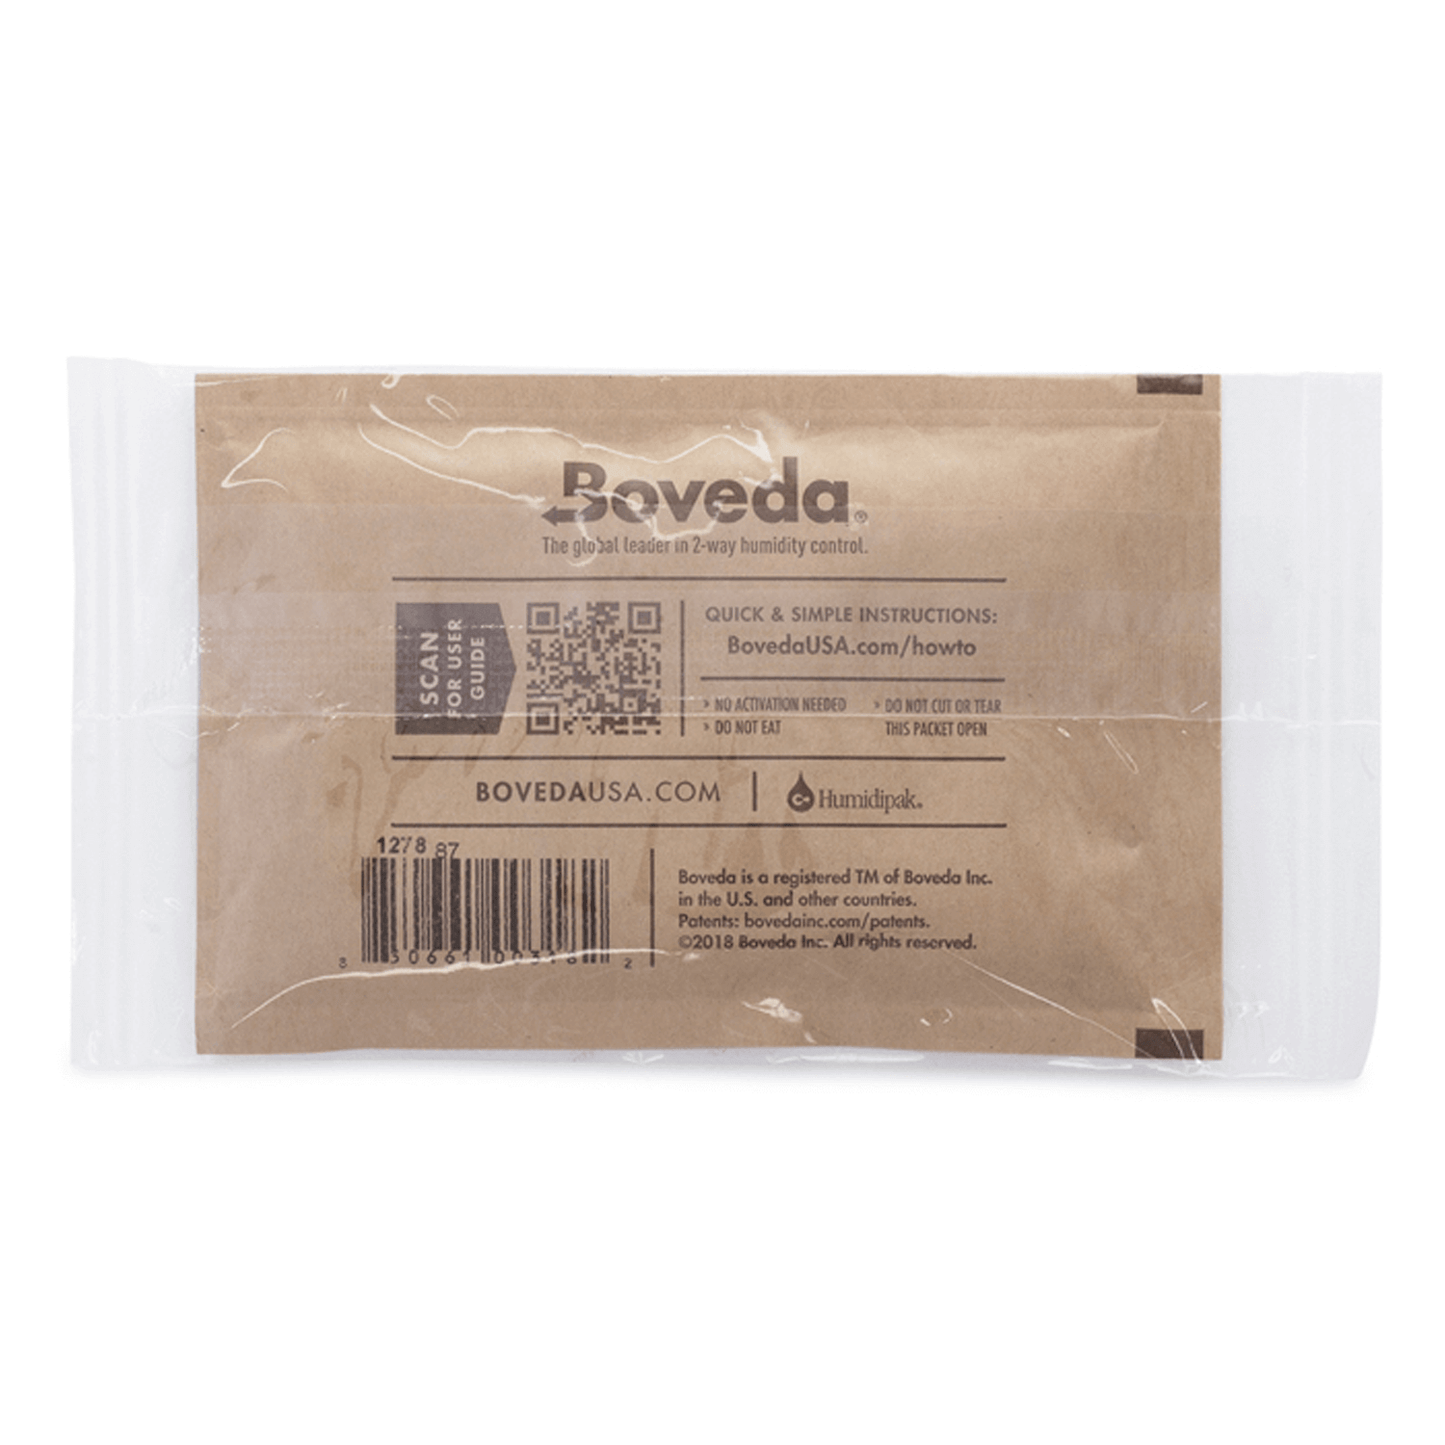 Boveda 67g 62% Relative Humidity Individually Wrapped Pack of 12 MB62-67-OWC Climate Control